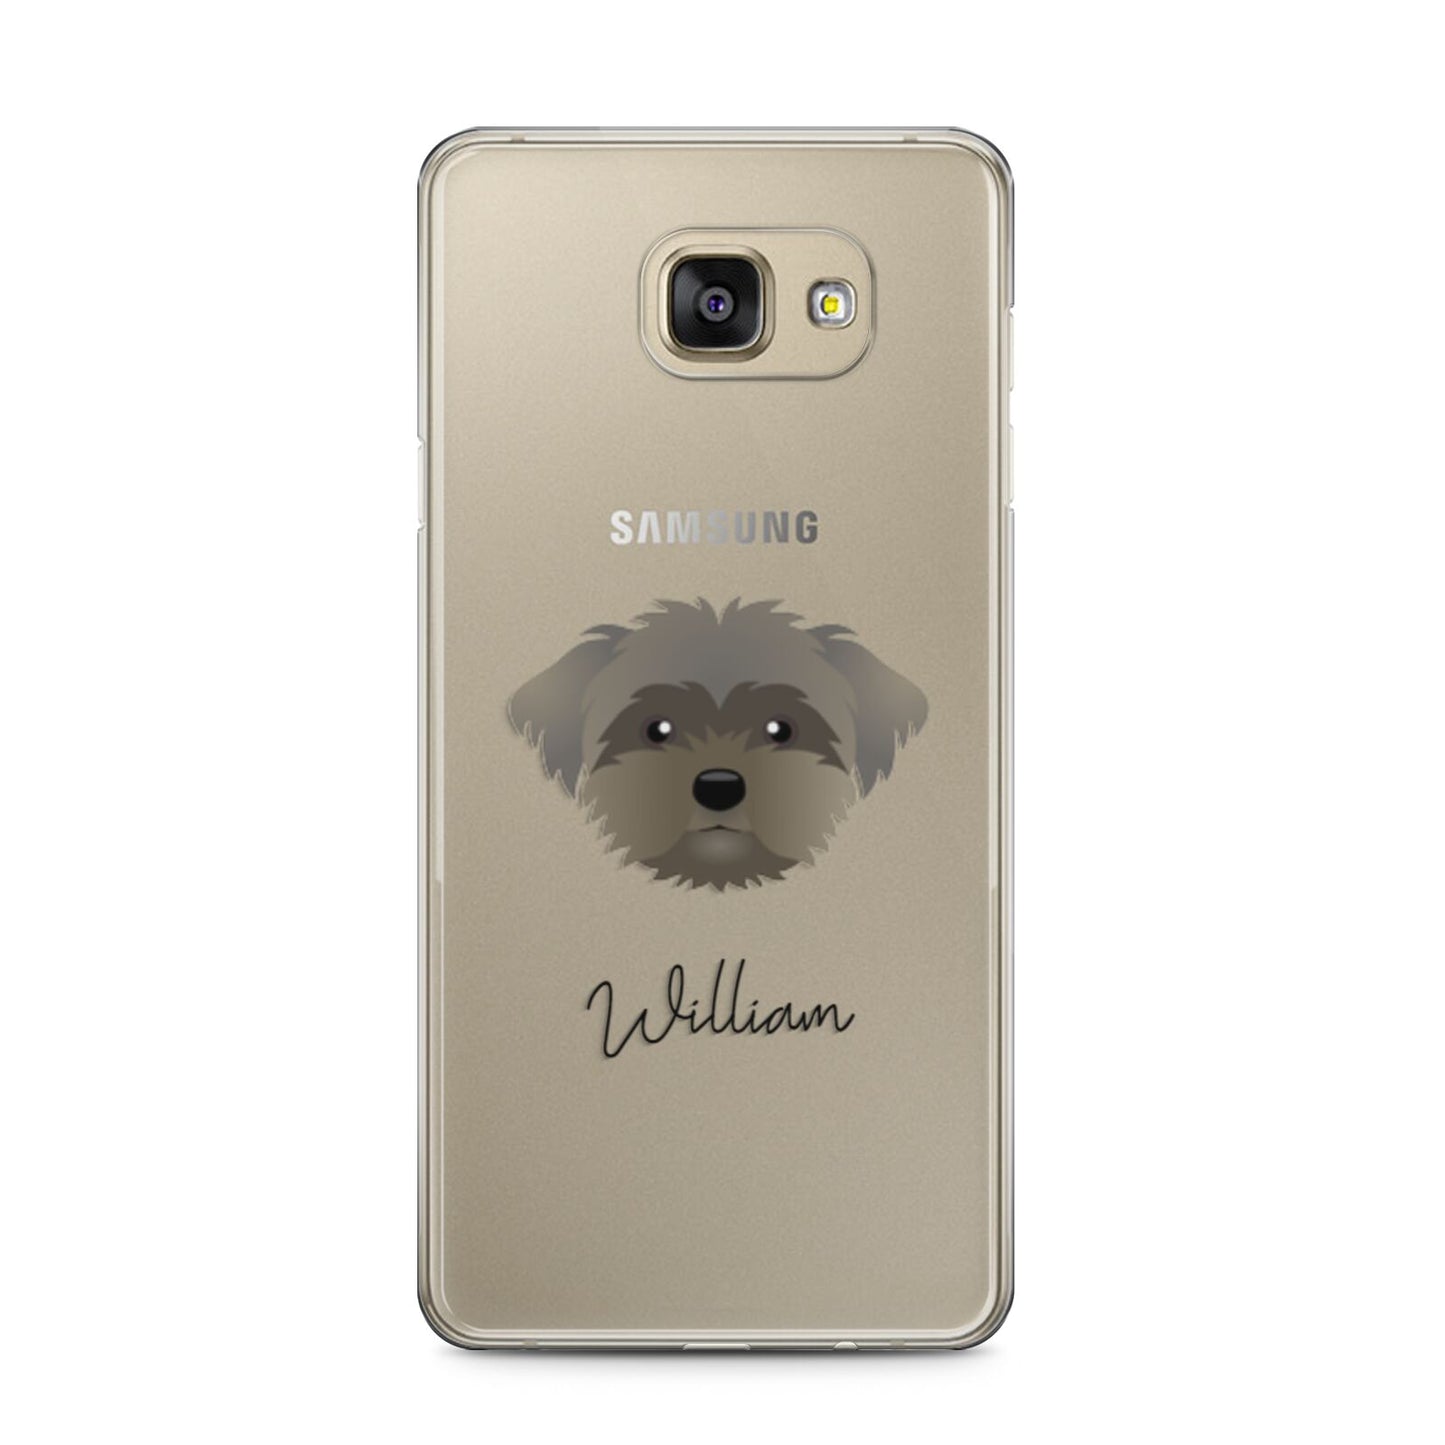 Peek a poo Personalised Samsung Galaxy A5 2016 Case on gold phone